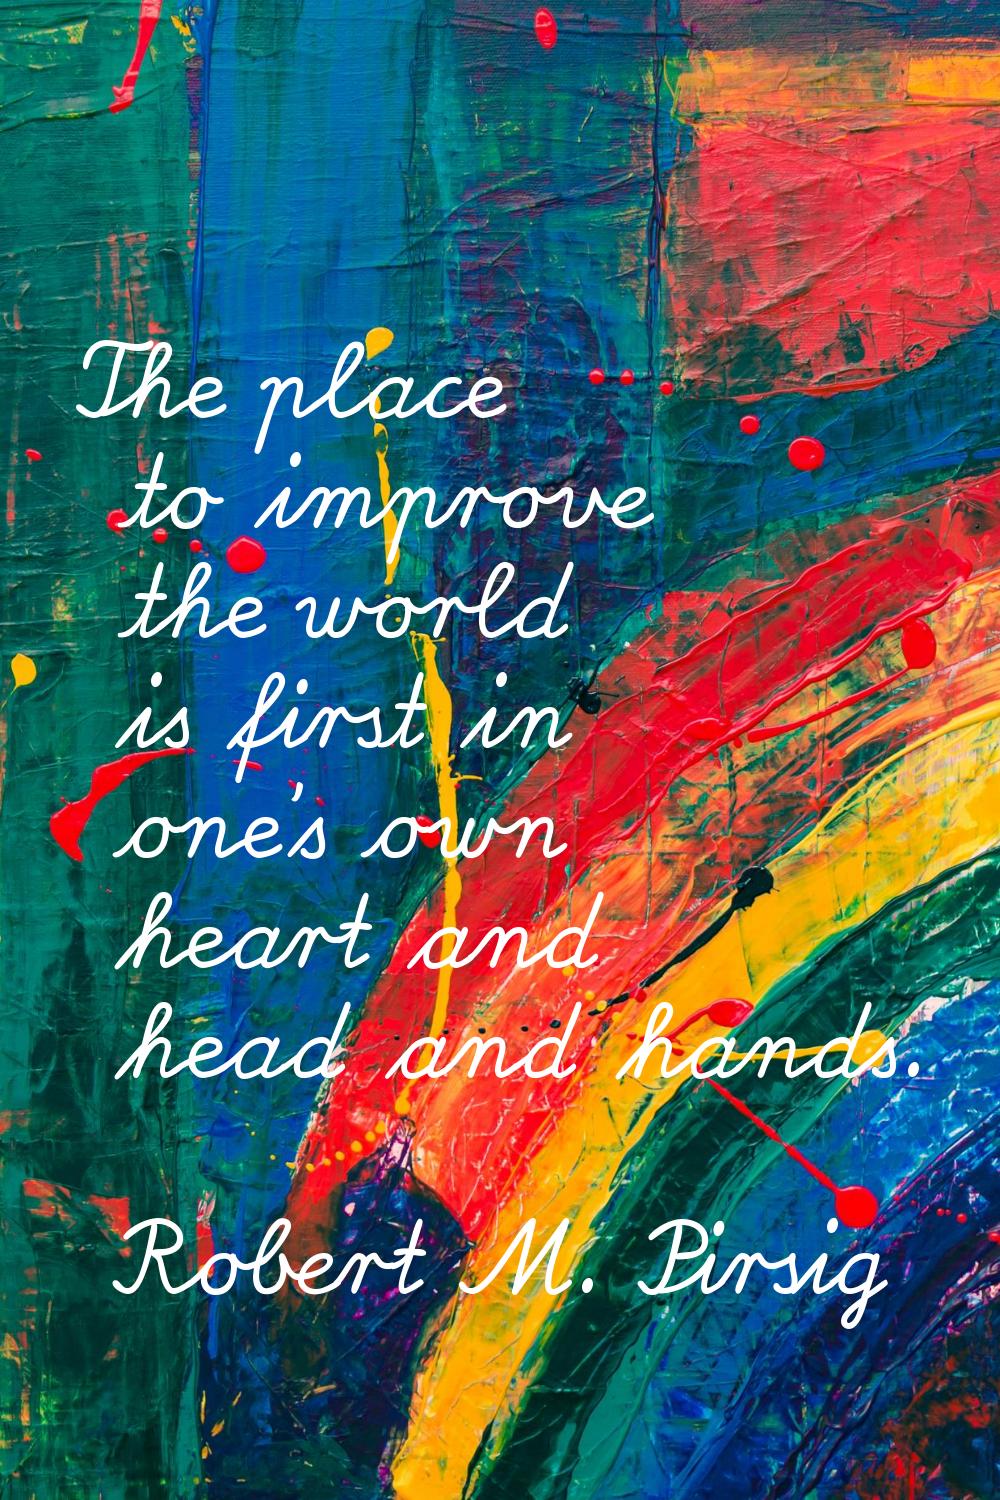 The place to improve the world is first in one's own heart and head and hands.